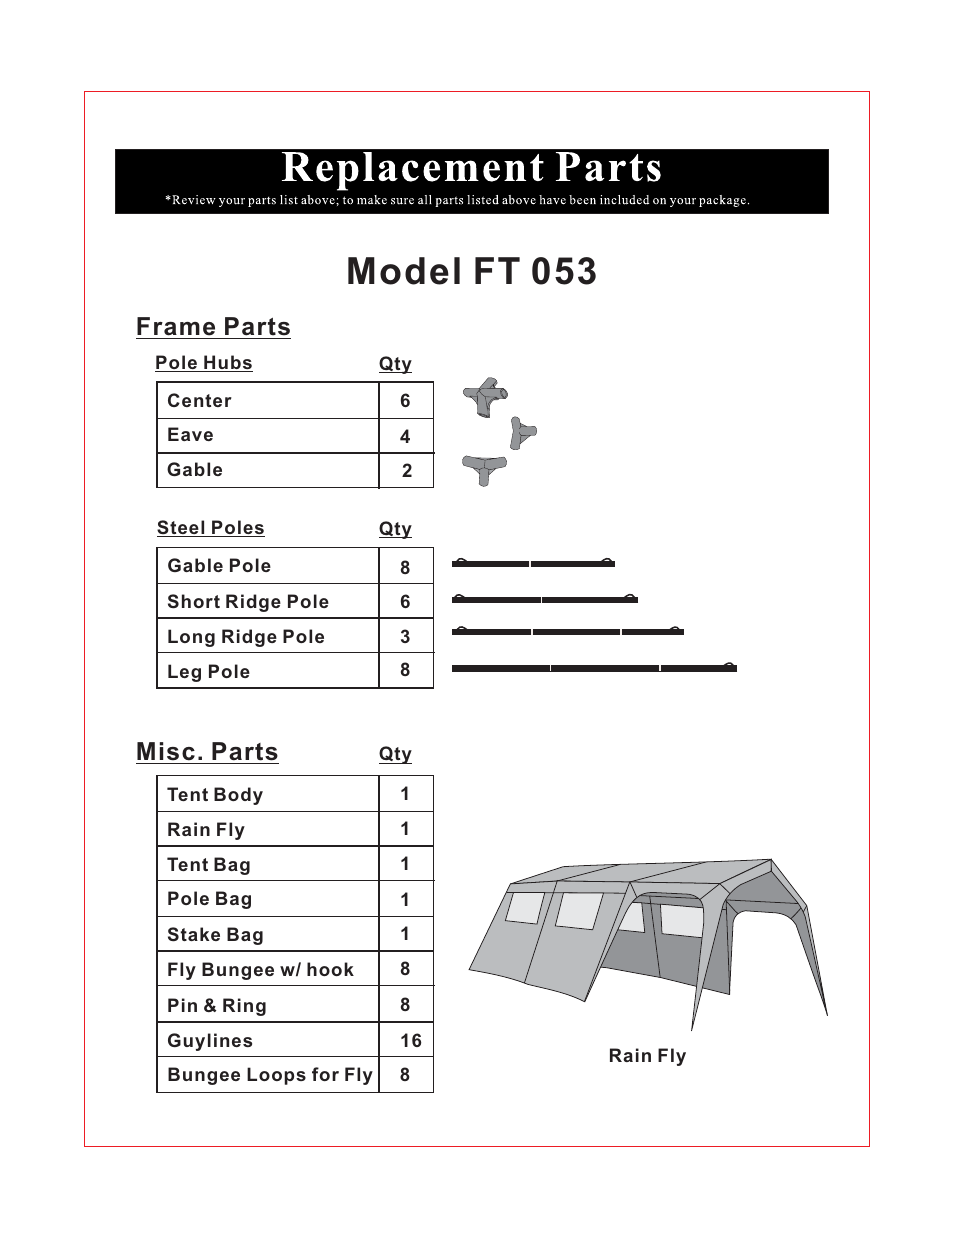 Model ft 053, Frame parts, Misc. parts | Giga Tent FT 053 User Manual | Page 4 / 8